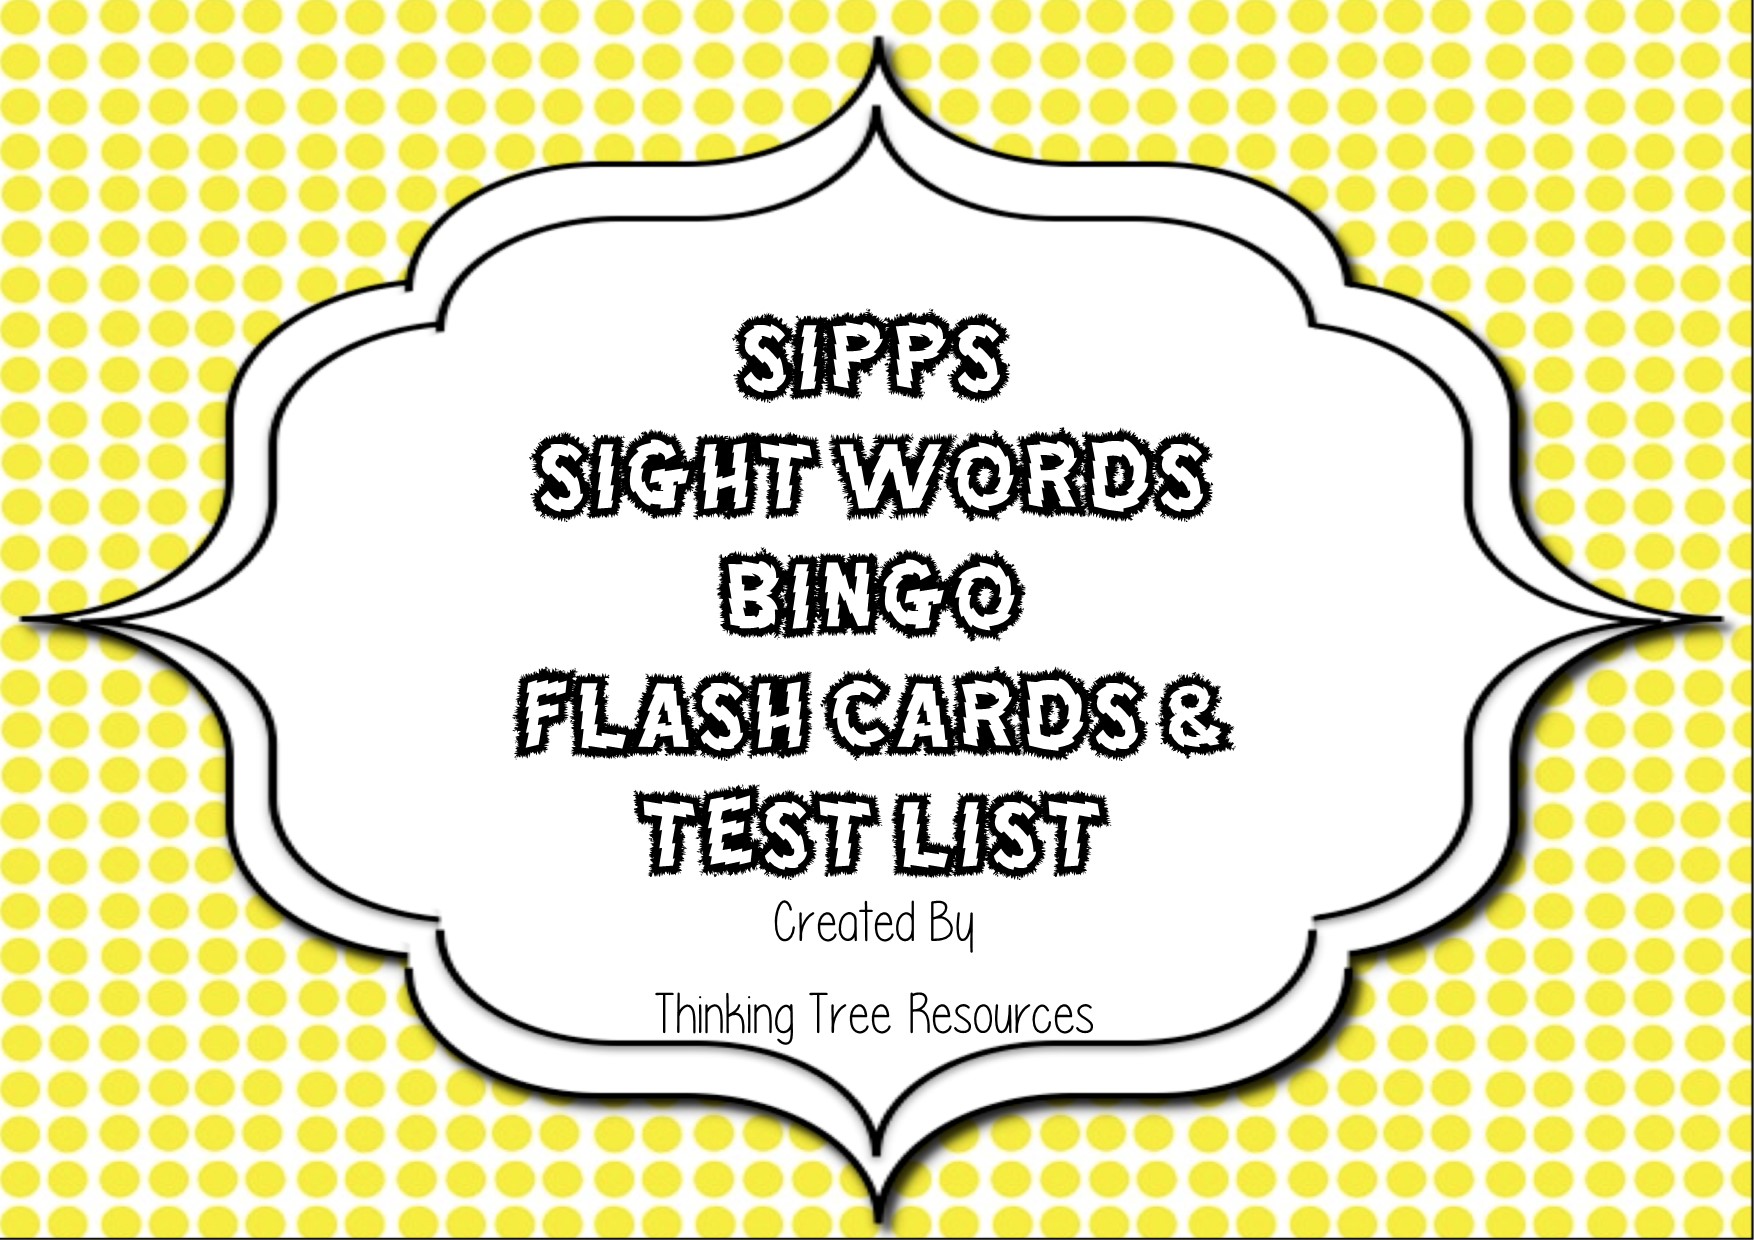 SIPPS Sight Word Bingo and Flash Cards